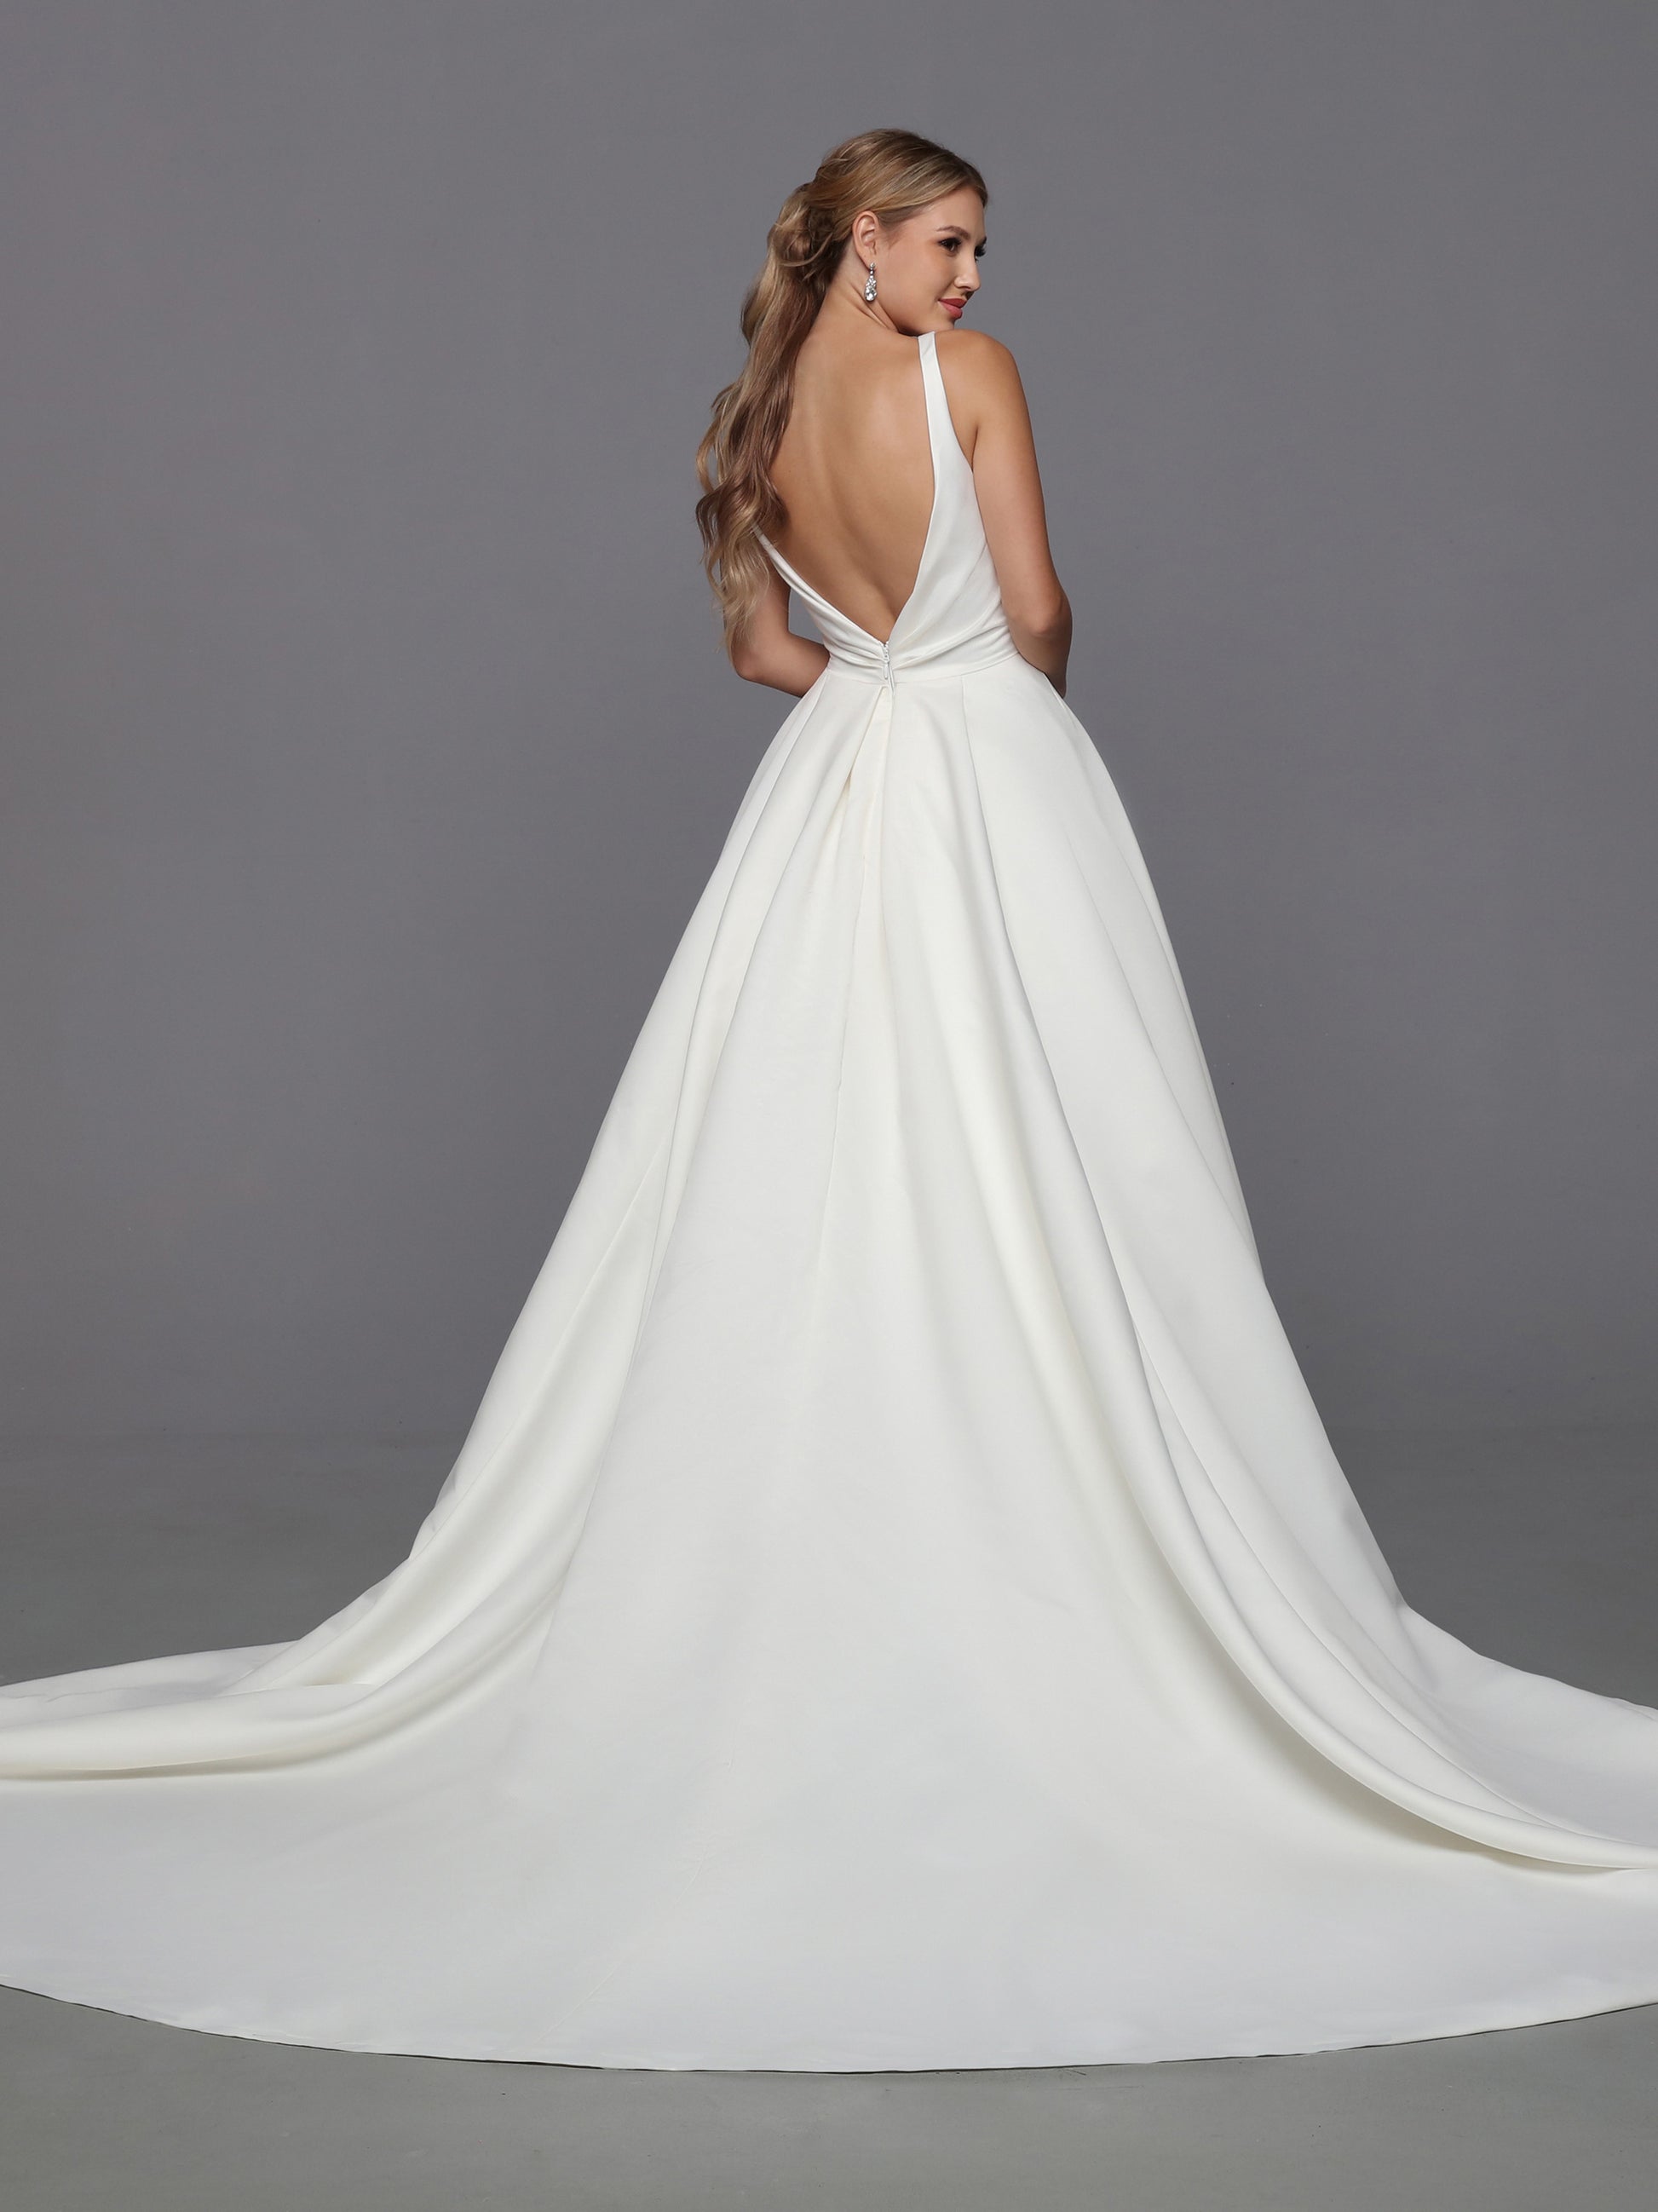 DaVinci Bridal 50766 A-Line Ballgown Satin Open Back Pockets Bow Train Wedding Gown. This feminine satin ball gown features lovely on-trend updates. The faux-wrap bodice has a waist-deep V-back accented with a removable oversized bow.